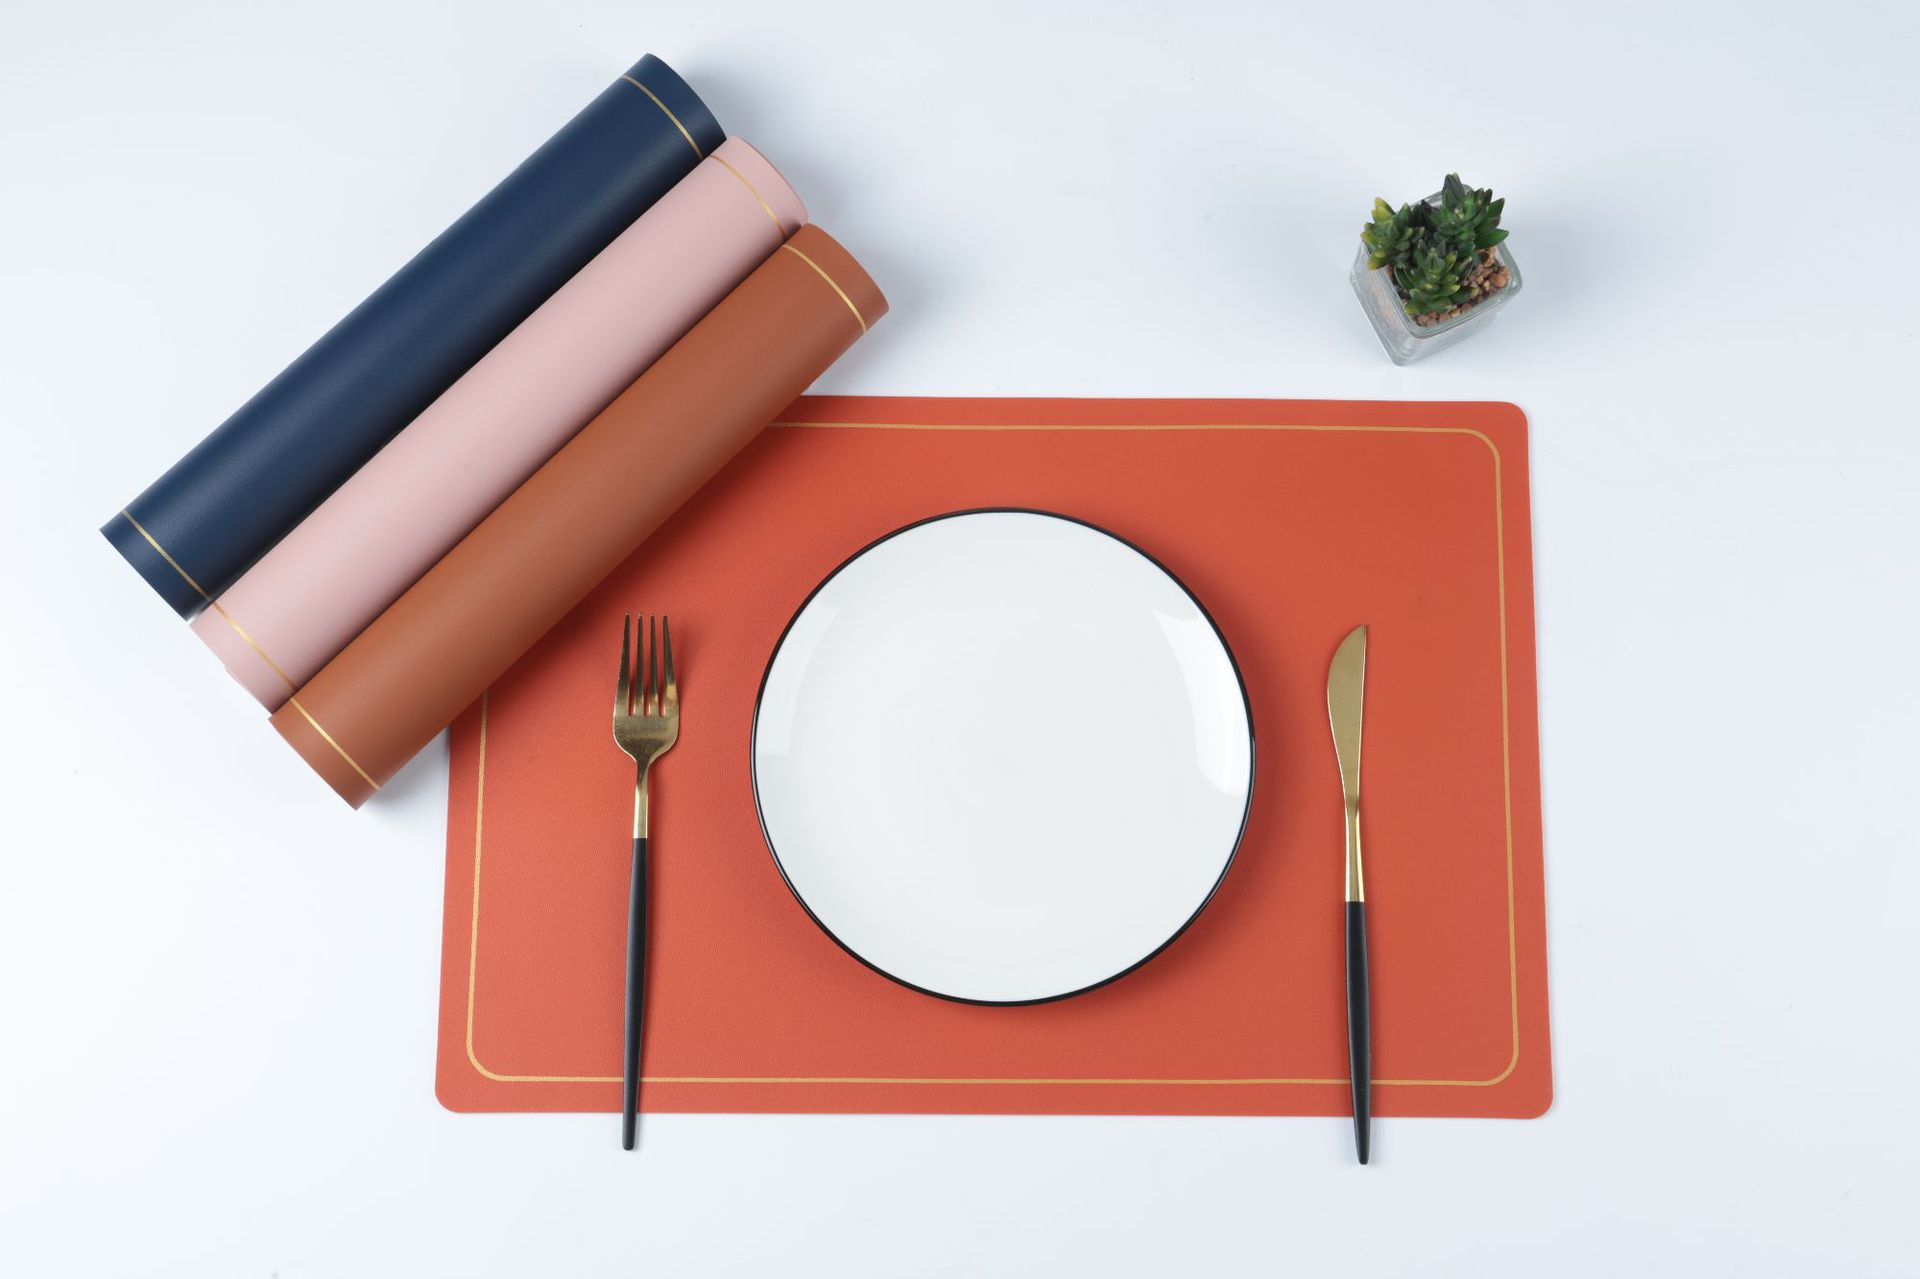 Nordic Rectangular Golden Edge Leather Placemat Waterproof Placemat Oil-Proof Western-Style Placemat Double-Sided Leather Placemat Table Mat Placemats